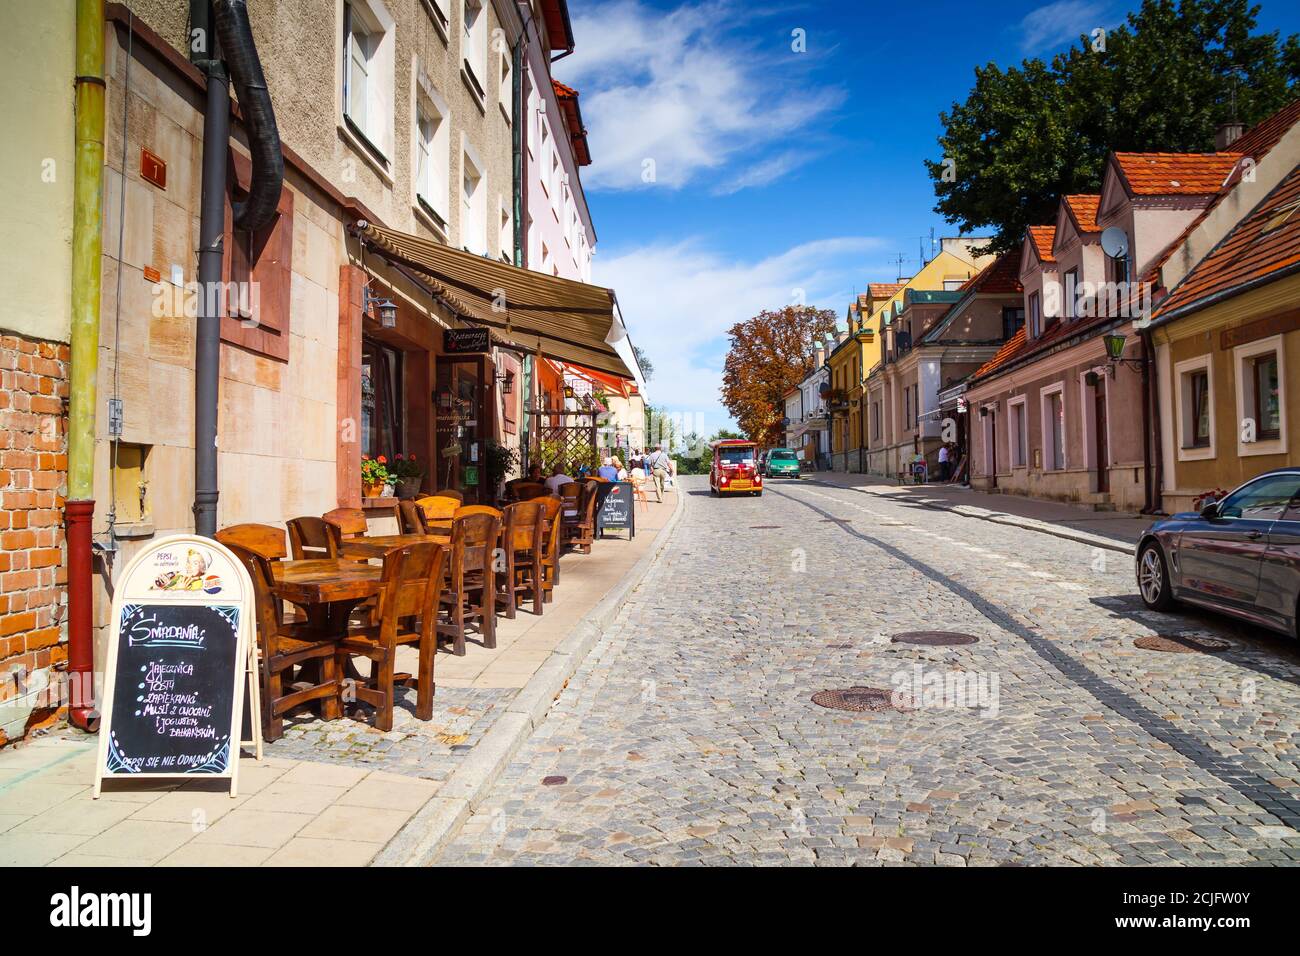 SANDOMIERZ, POLAND - August 27, 2020. View of the old, 13th century streets of Sandomierz with colorful houses. Stock Photo